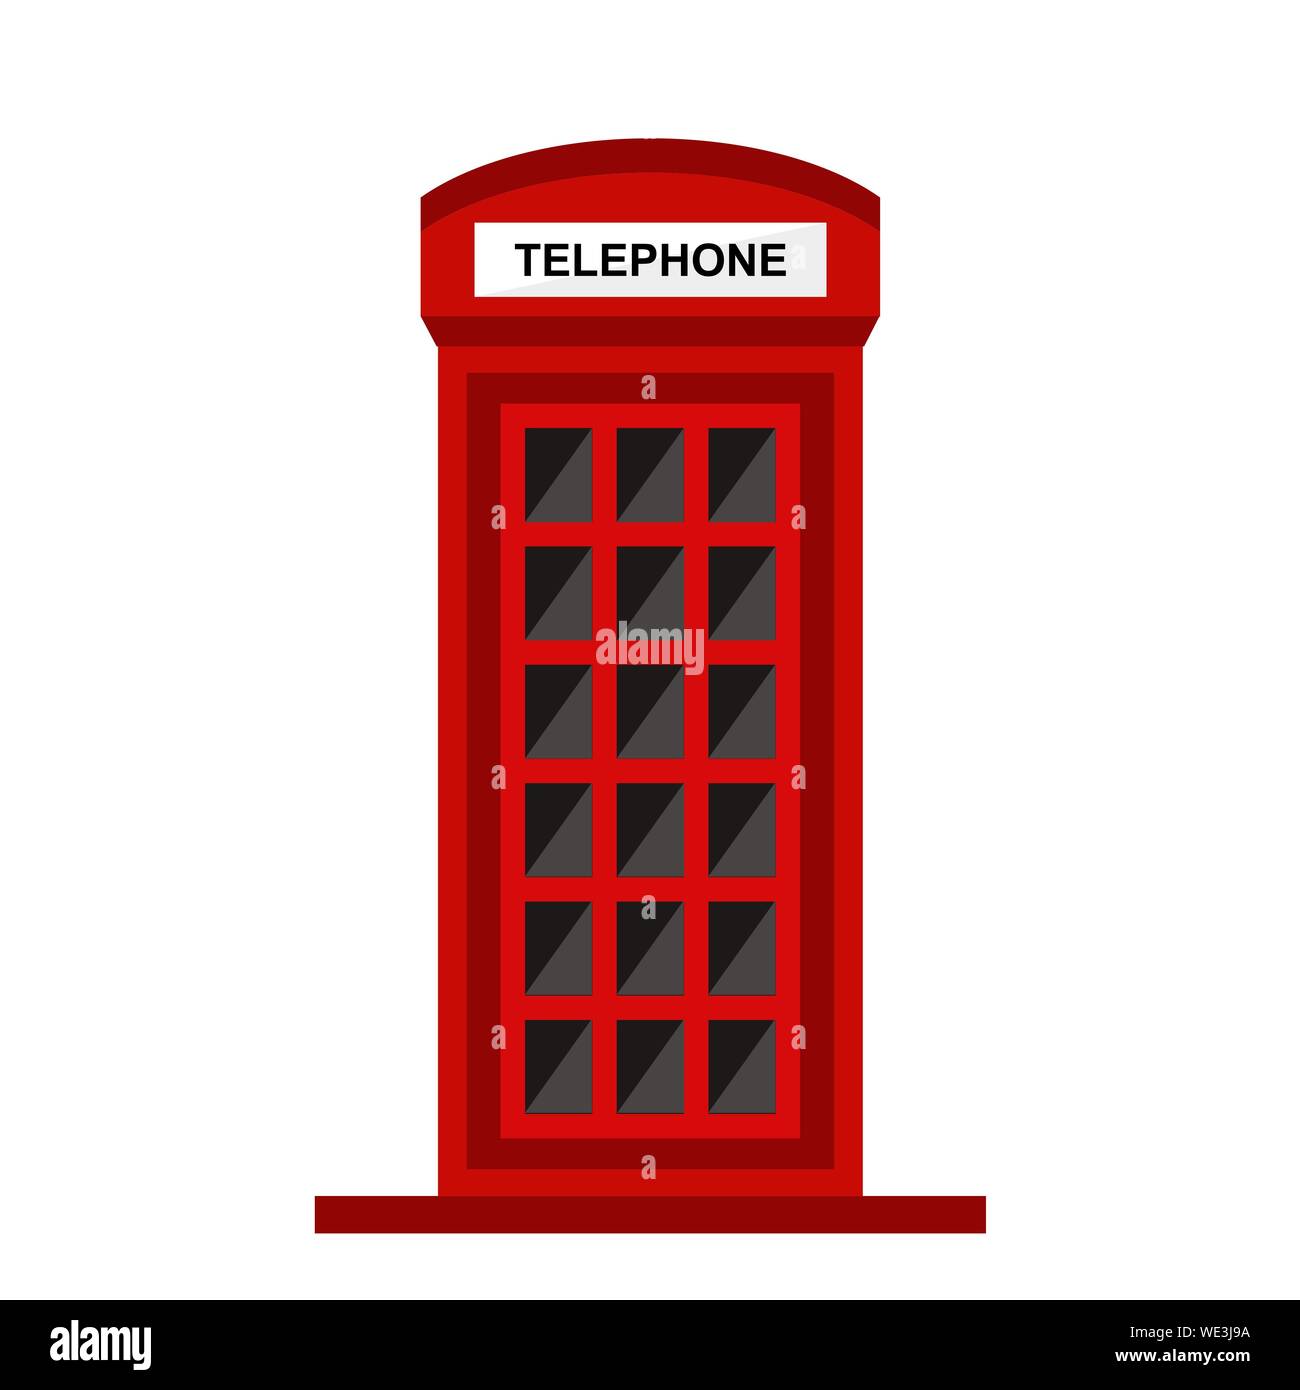 red telephone booth isolated on white background illustration Stock Vector